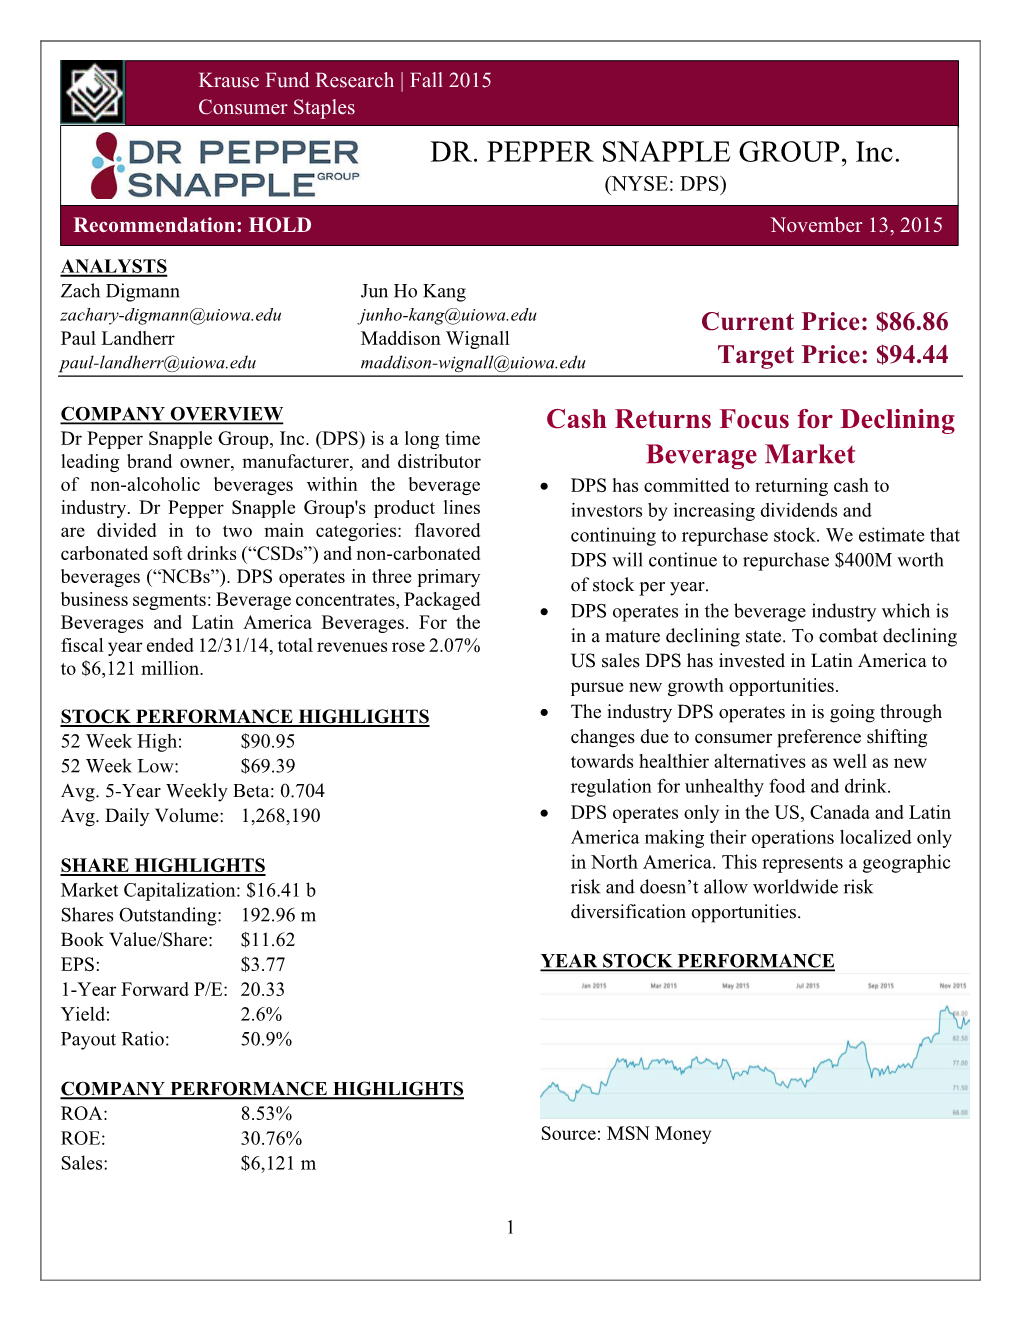 DR. PEPPER SNAPPLE GROUP, Inc. (NYSE: DPS)